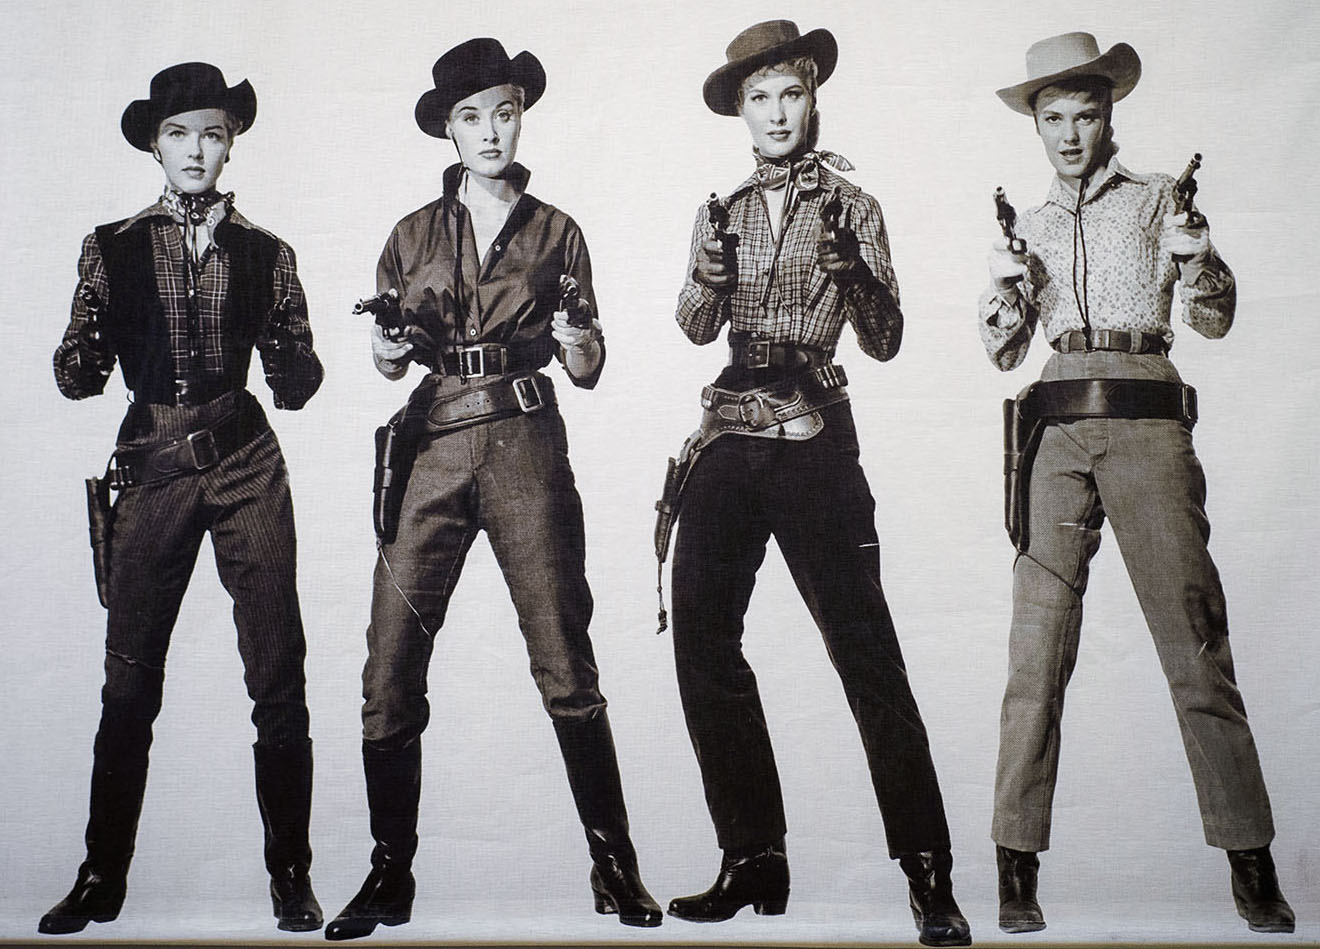 A black and white group of cowgirls standing with guns drawn toward the camera